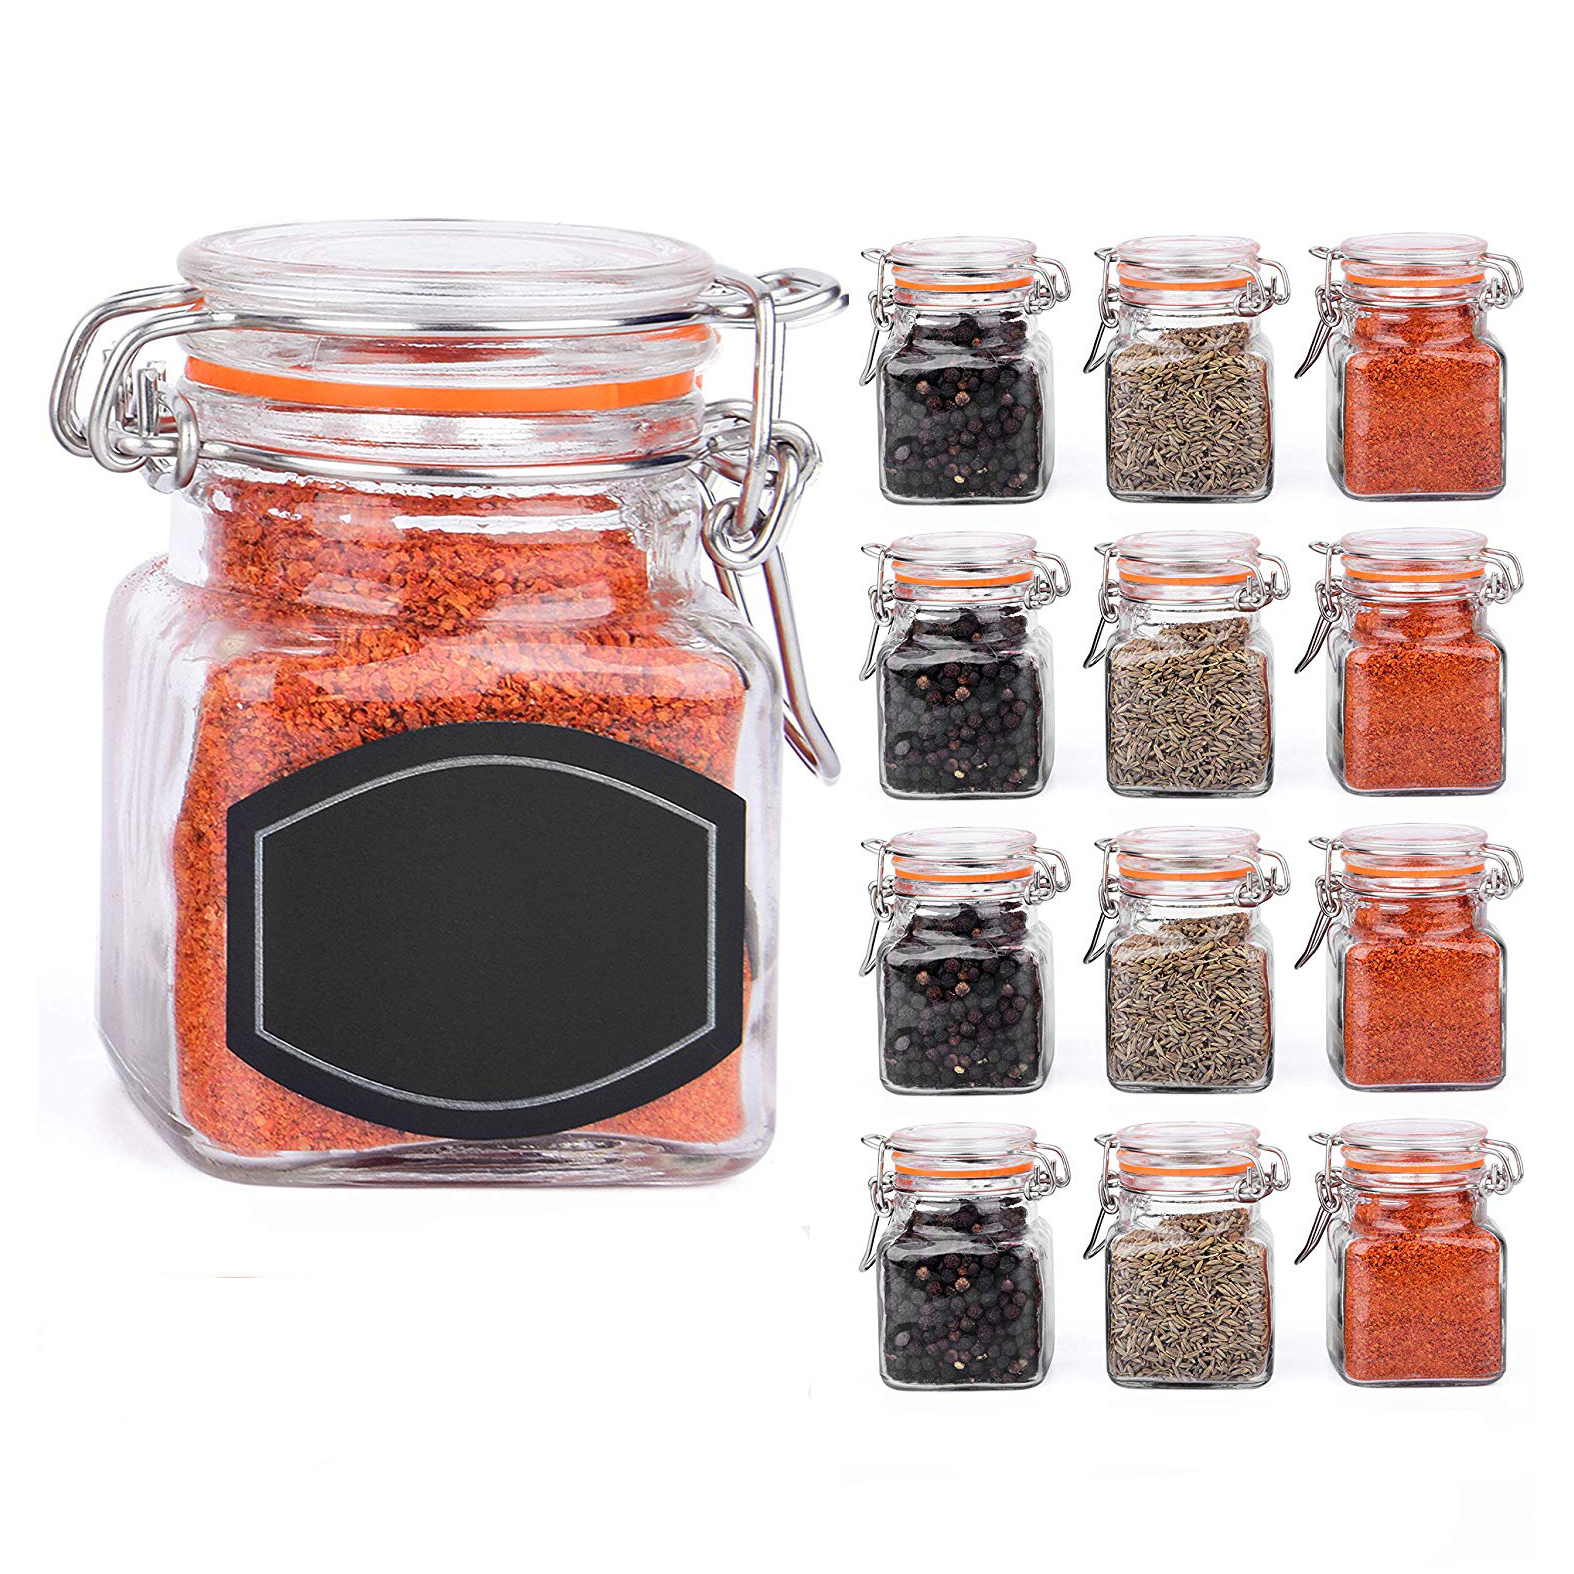 French Square Spice Jars, Spice Shaker/Pourer with Lid, 8oz, (4 Pack)